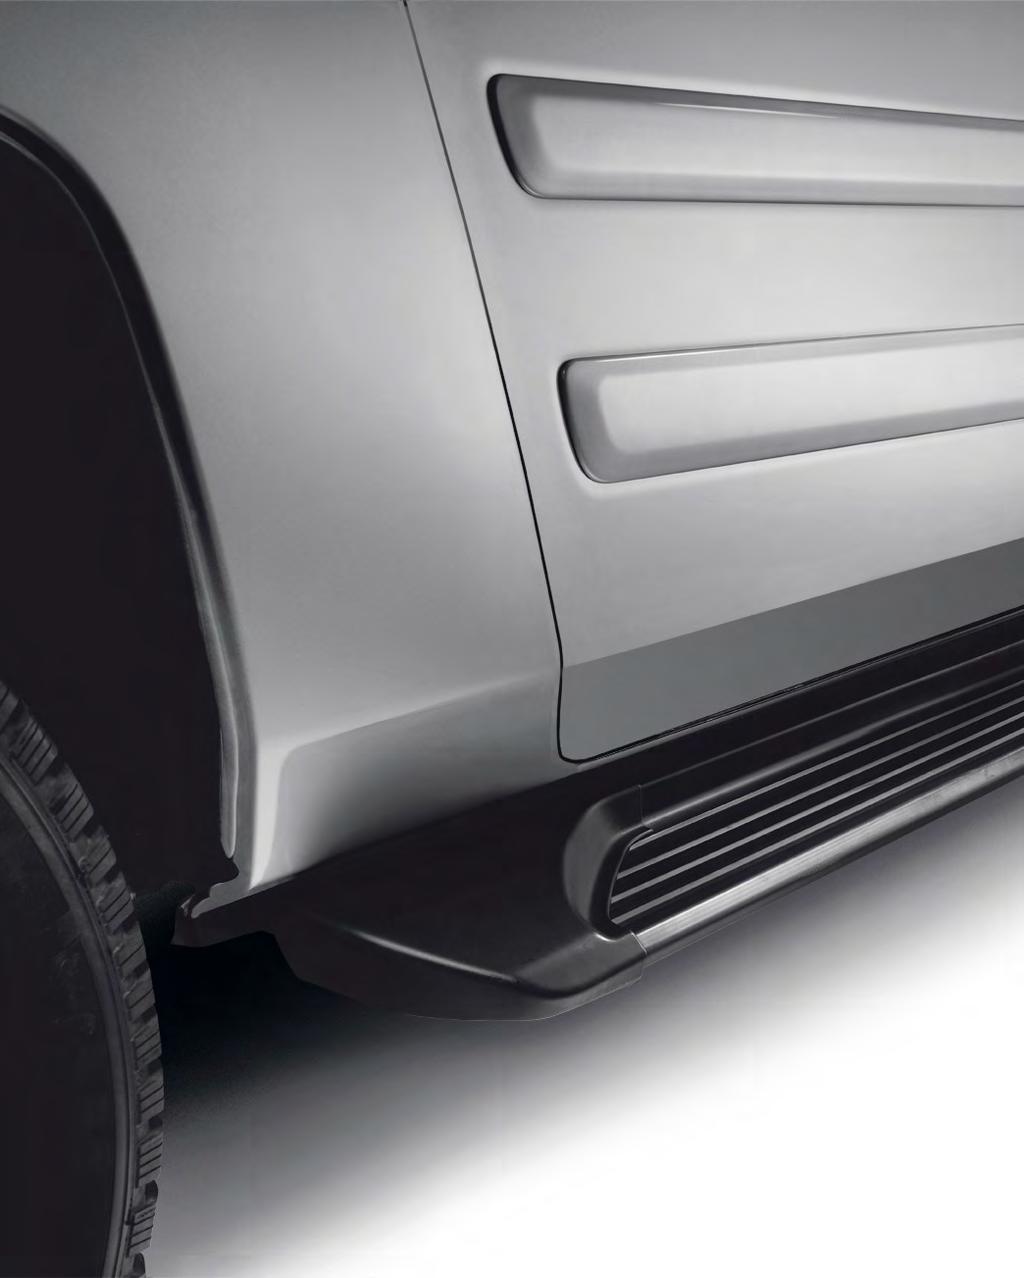 RUNNING BOARDS Running Boards are there to give you an extra step when entering or exiting your vehicle.